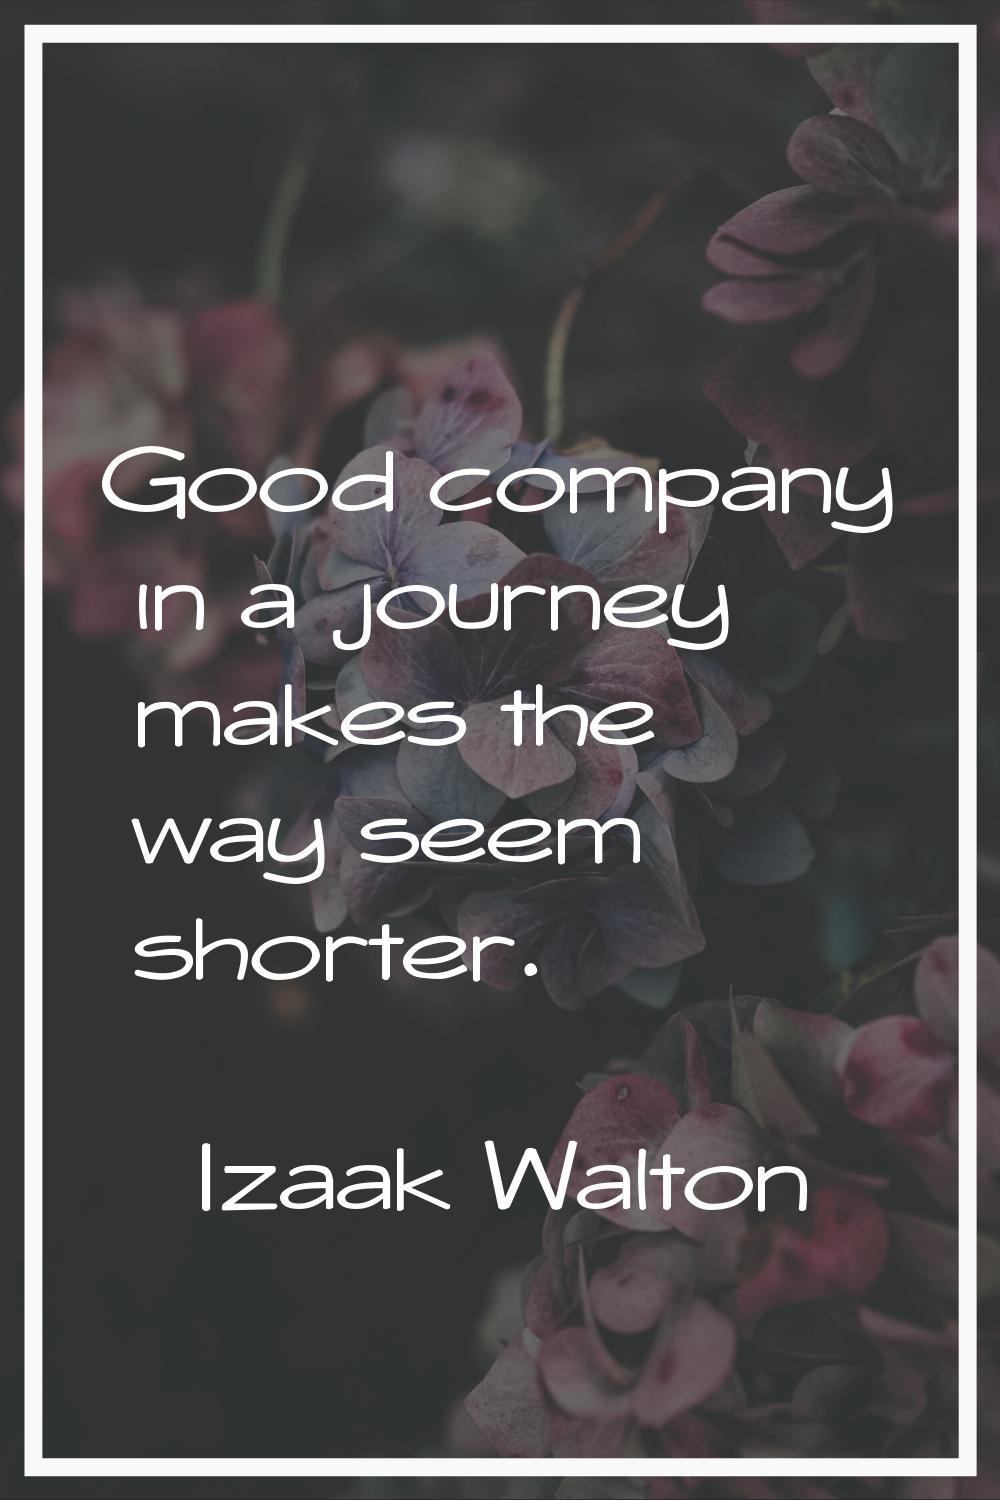 Good company in a journey makes the way seem shorter.